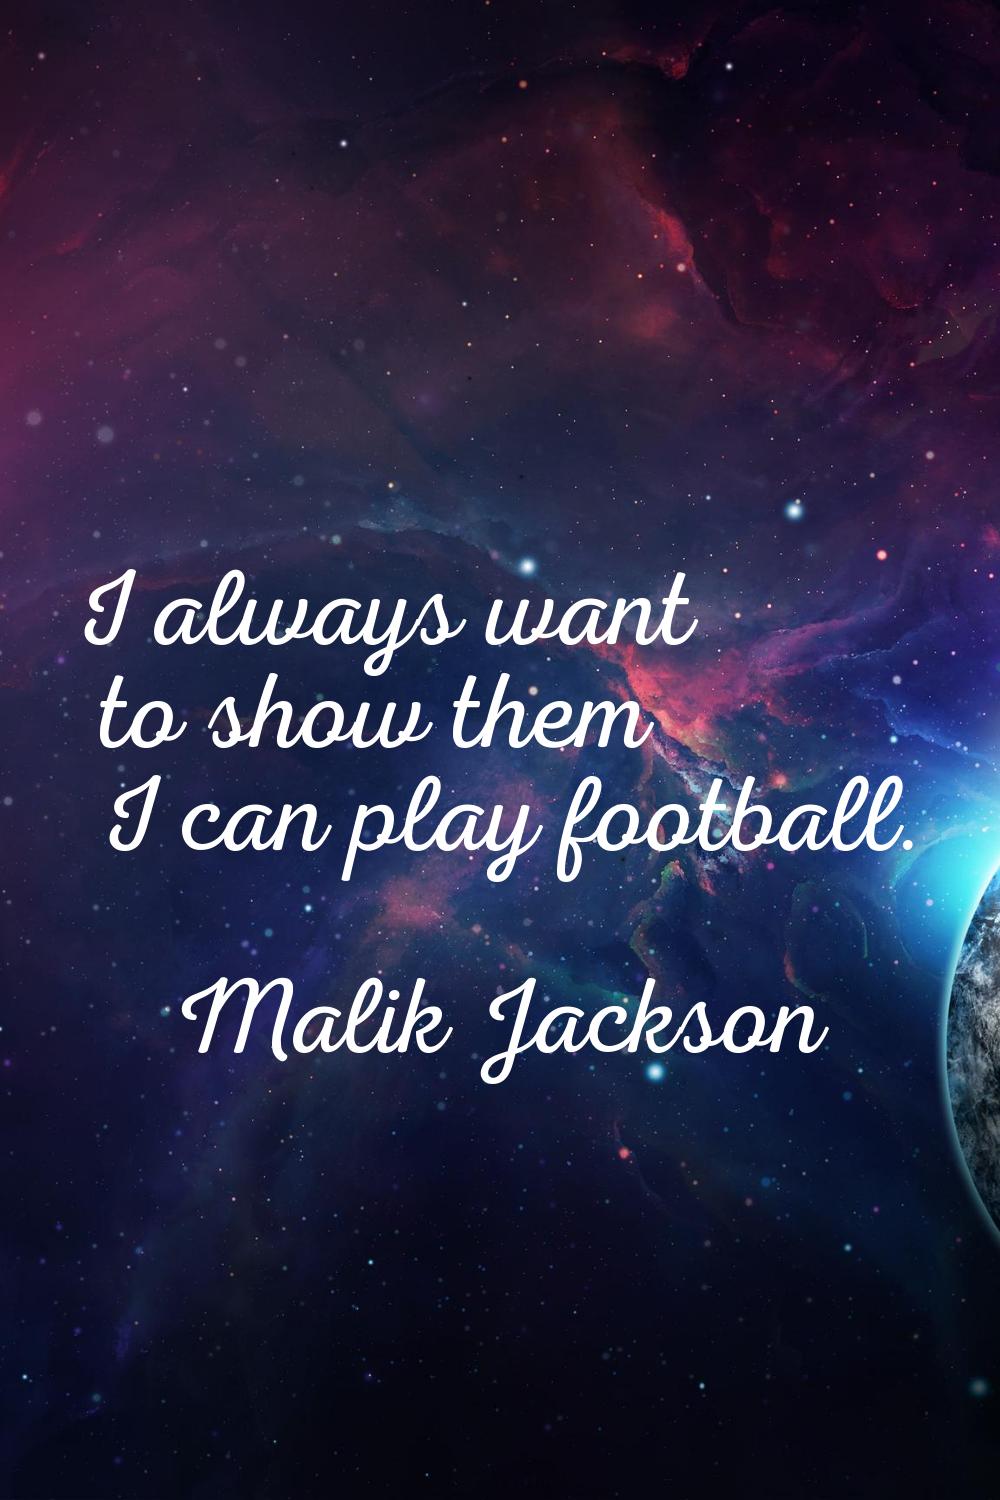 I always want to show them I can play football.